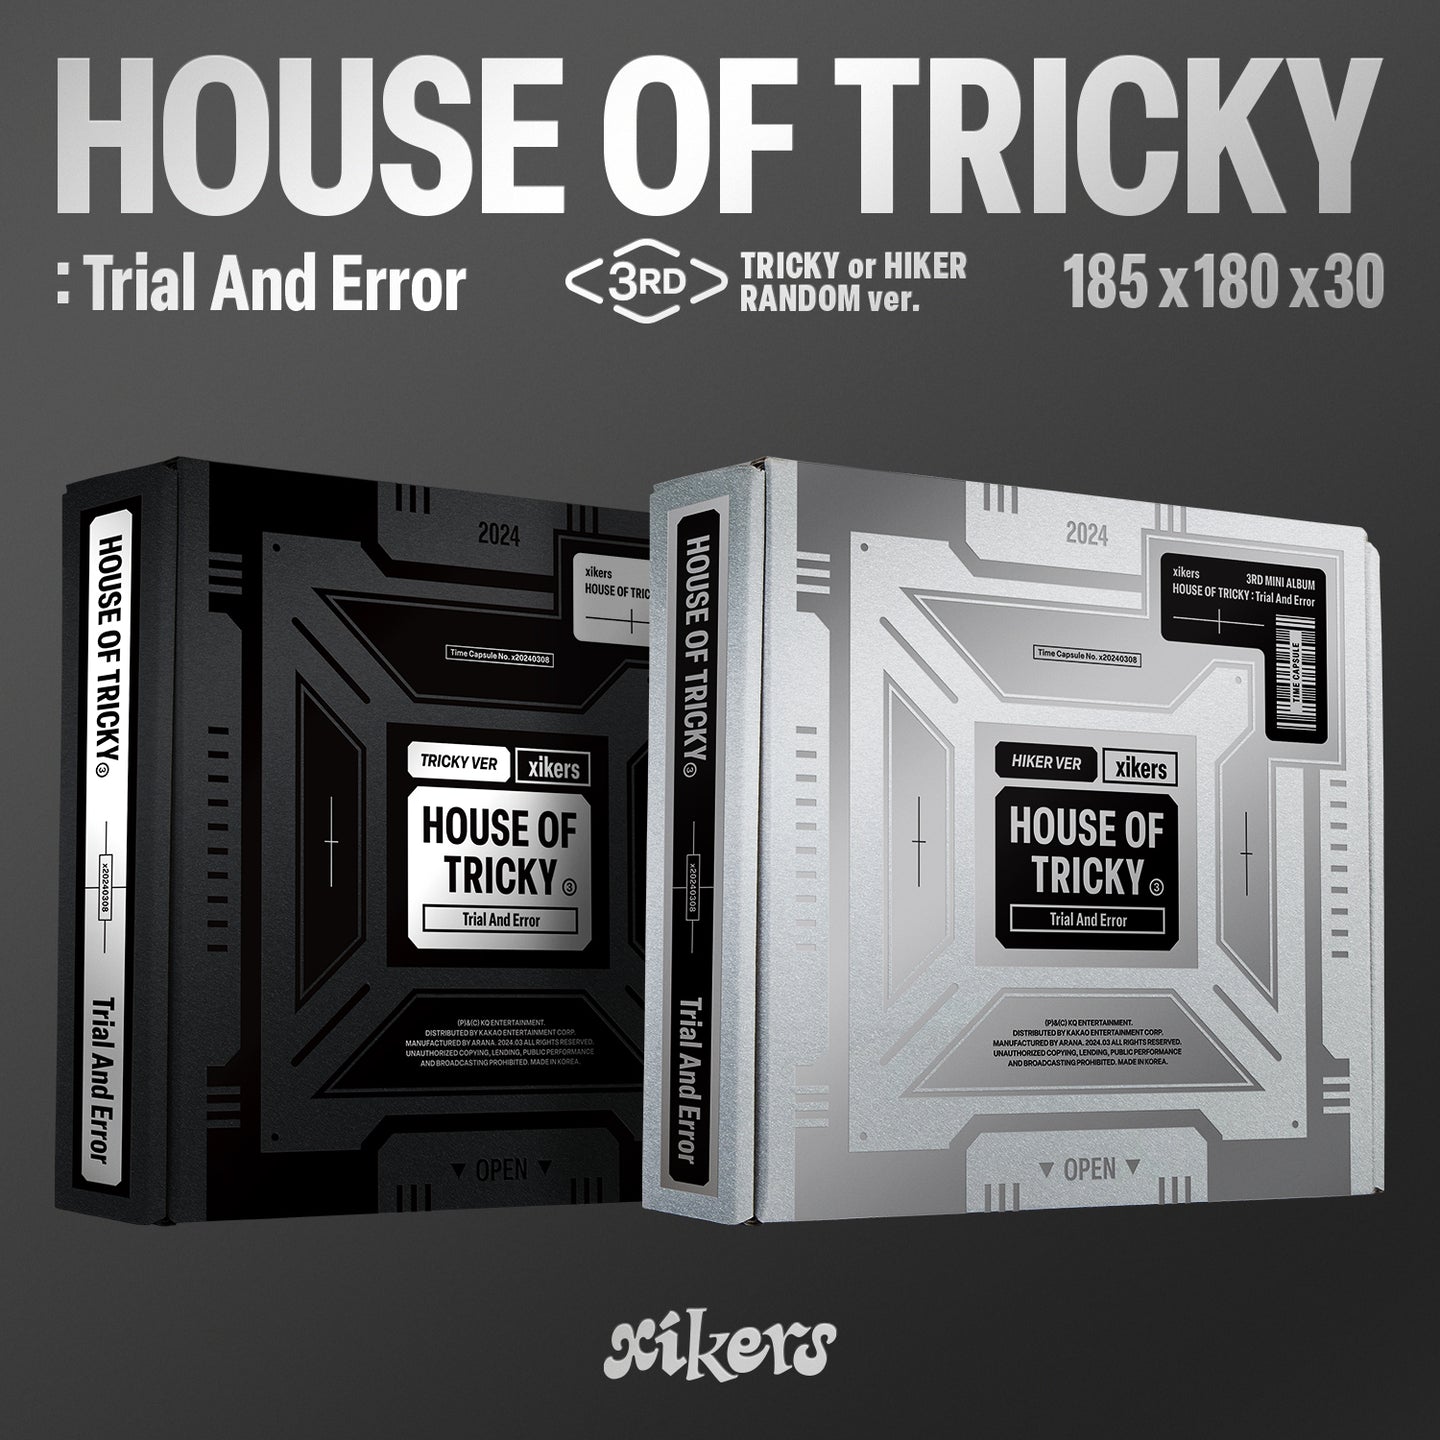 xikers Mini Album Vol. 3 – HOUSE OF TRICKY : Trial And Error (Random)